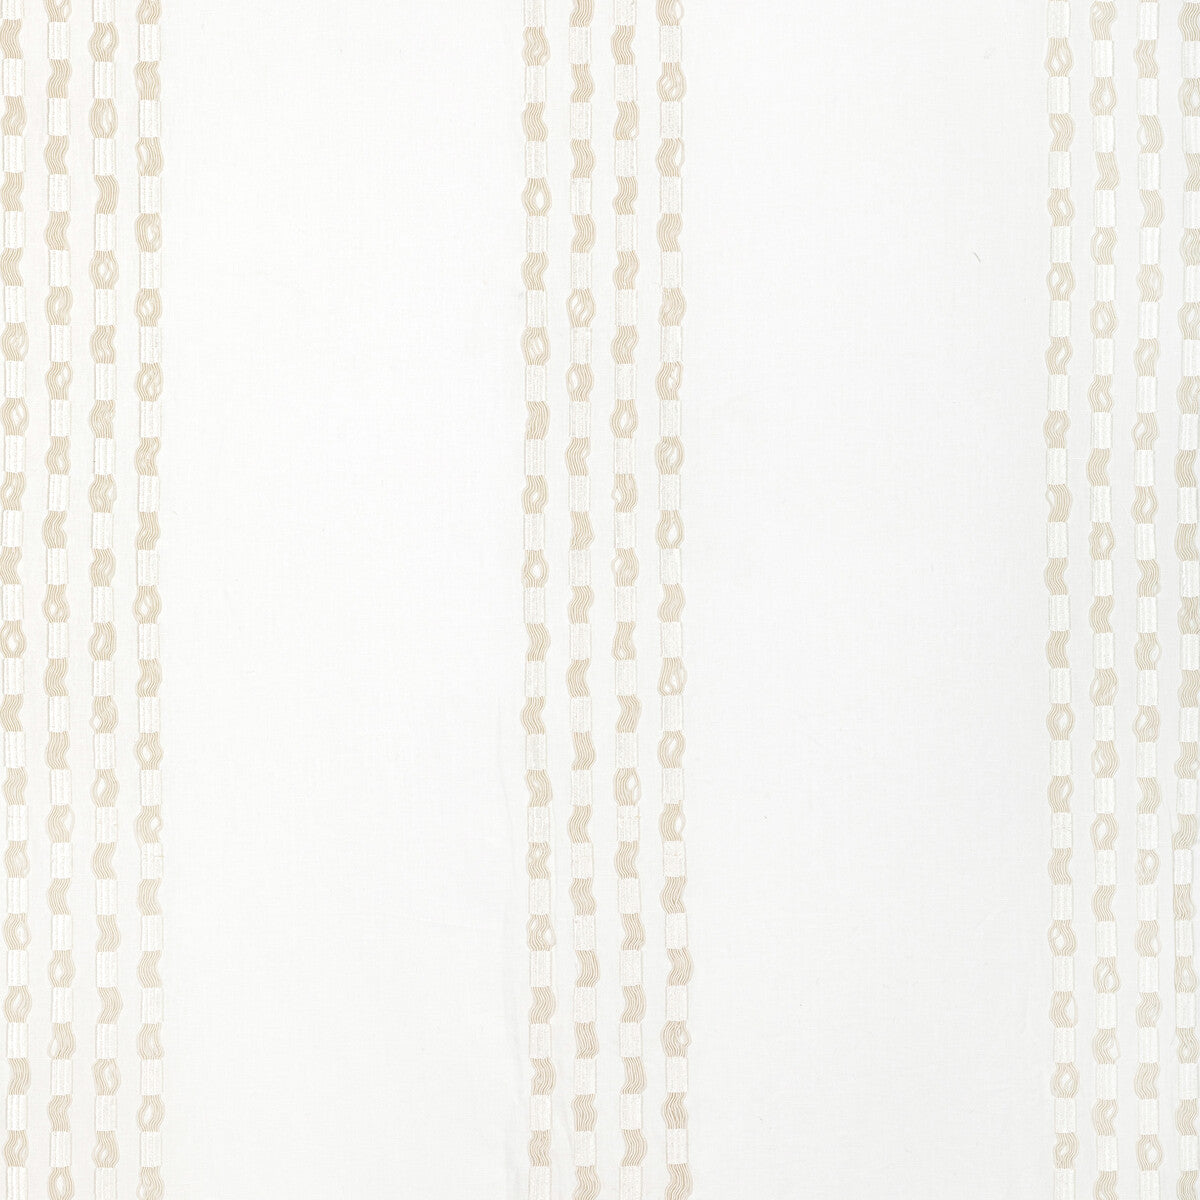 Linear Effect fabric in ivory color - pattern 36354.1.0 - by Kravet Couture in the Modern Luxe III collection